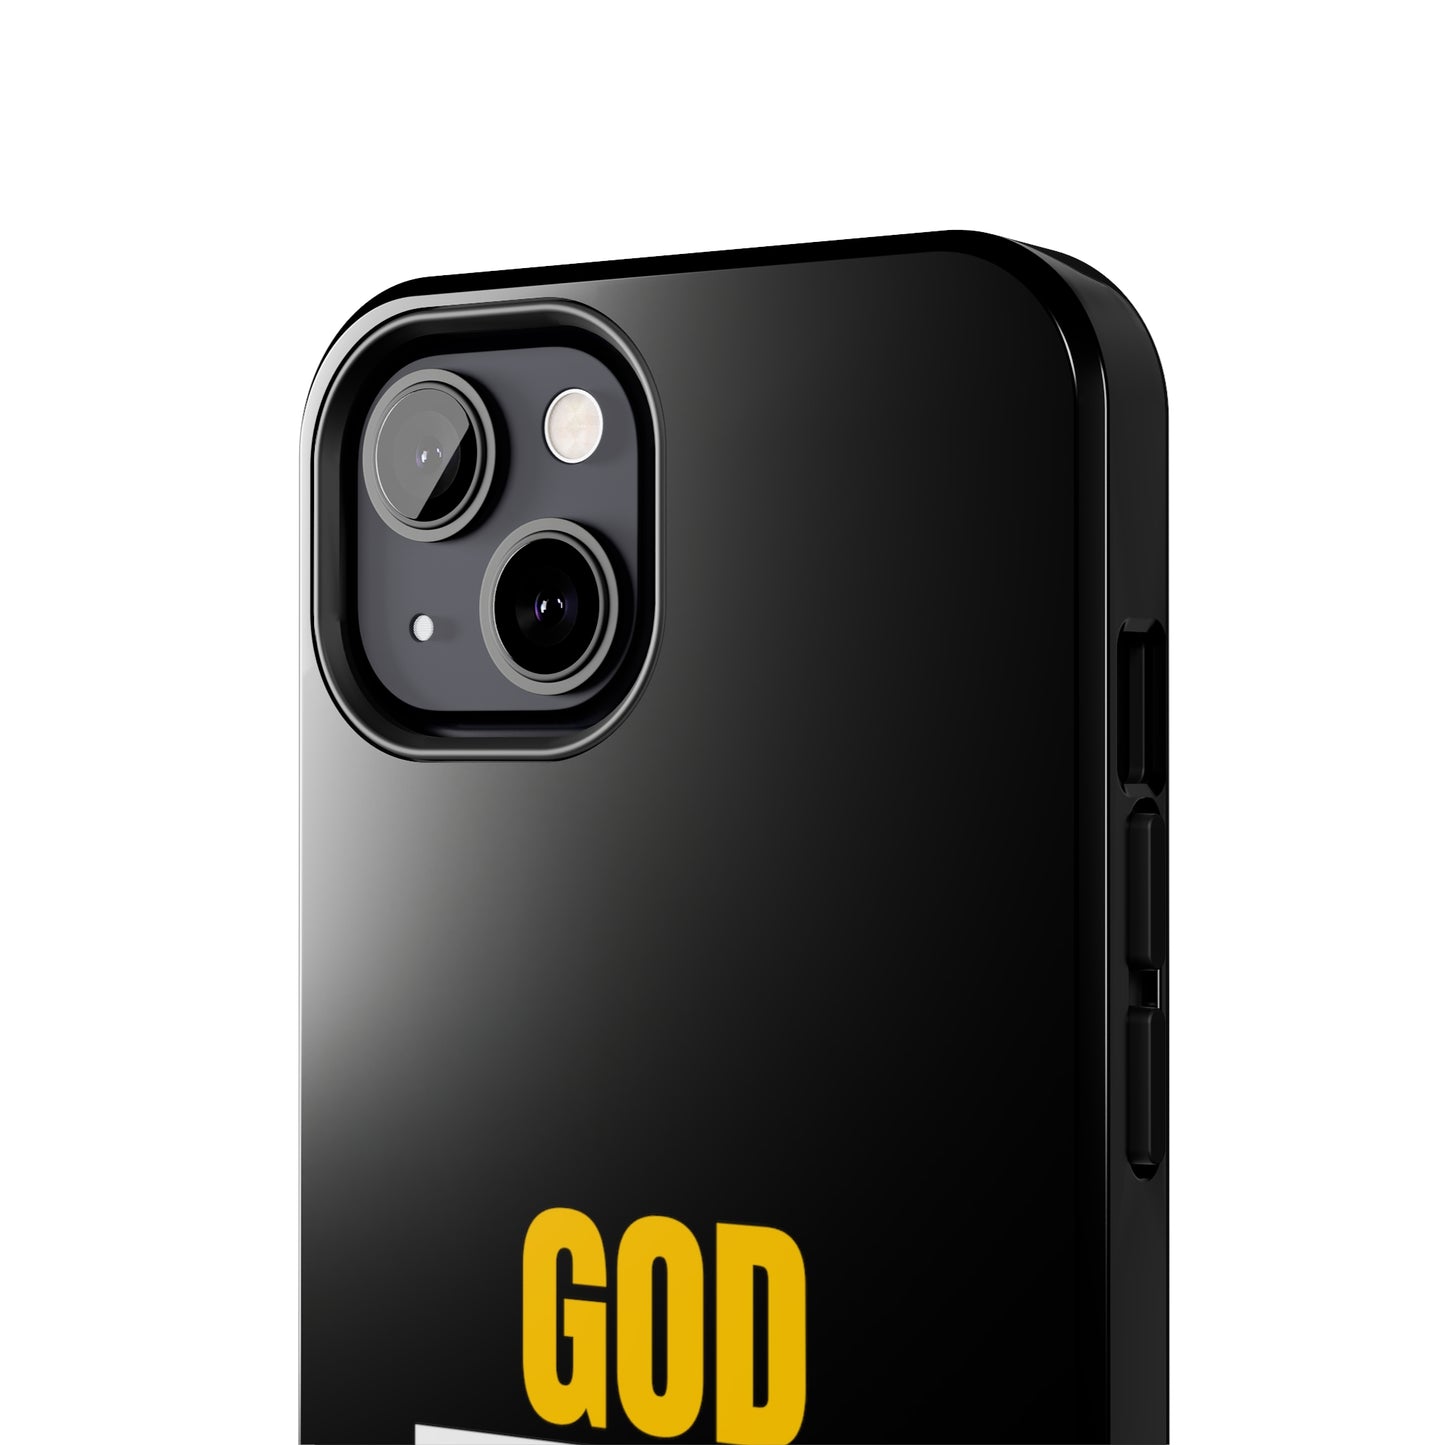 God Loved Me First Tough Phone Cases, Case-Mate Printify